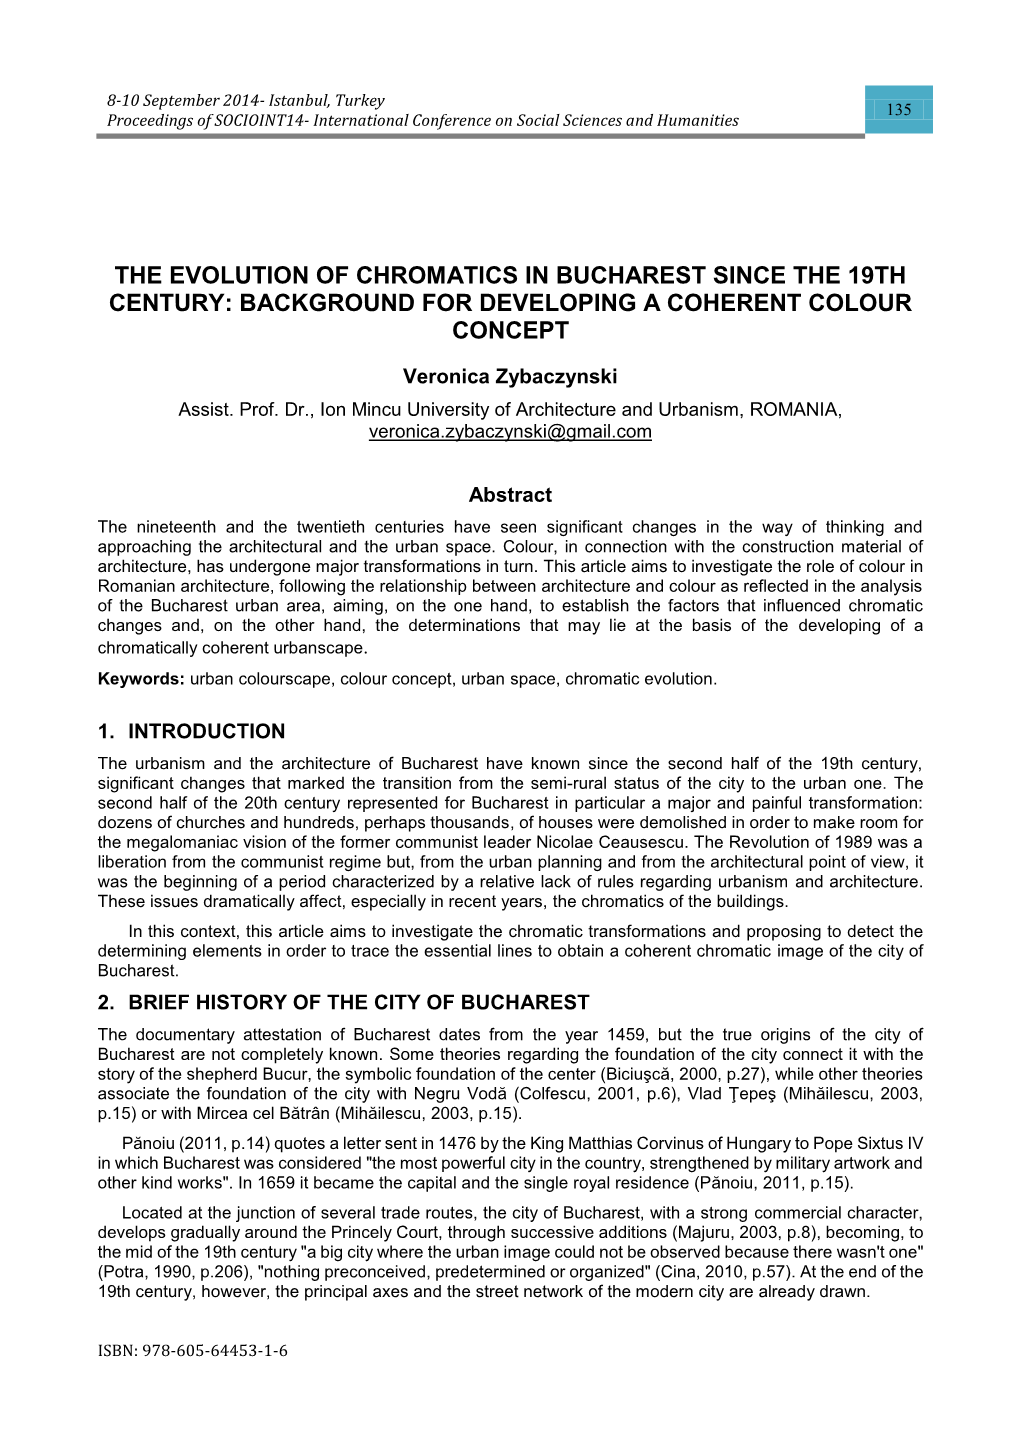 The Evolution of Chromatics in Bucharest Since the 19Th Century: Background for Developing a Coherent Colour Concept